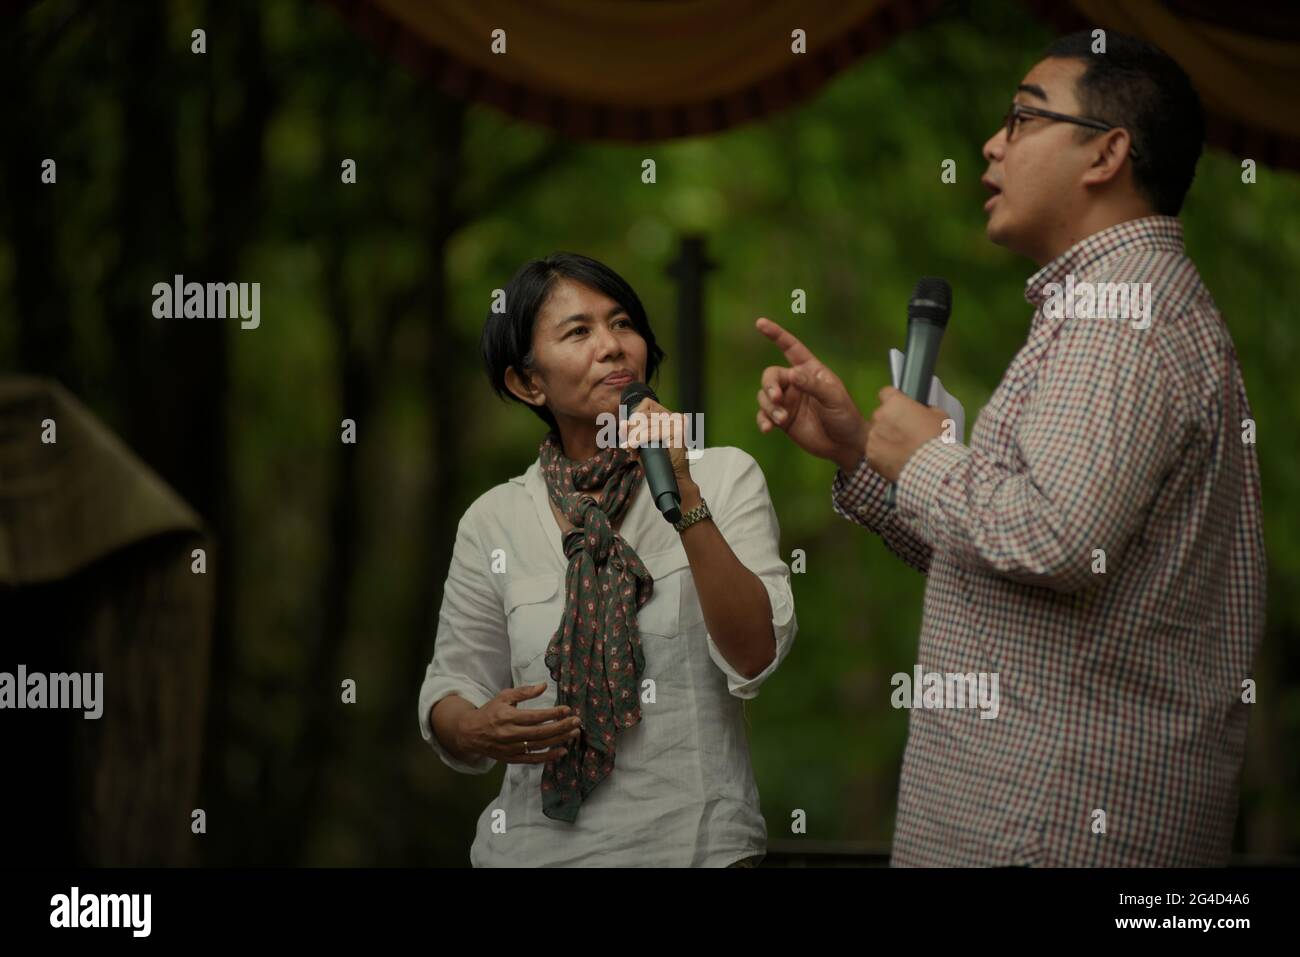 Indonesian broadcast news presenter Desi Anwar and Muhammad Farhan having a talk show on national park and nature conservation on stage, during an event held by Indonesia's Ministry of Forestry in Way Kambas National Park, Lampung, Indonesia. Stock Photo